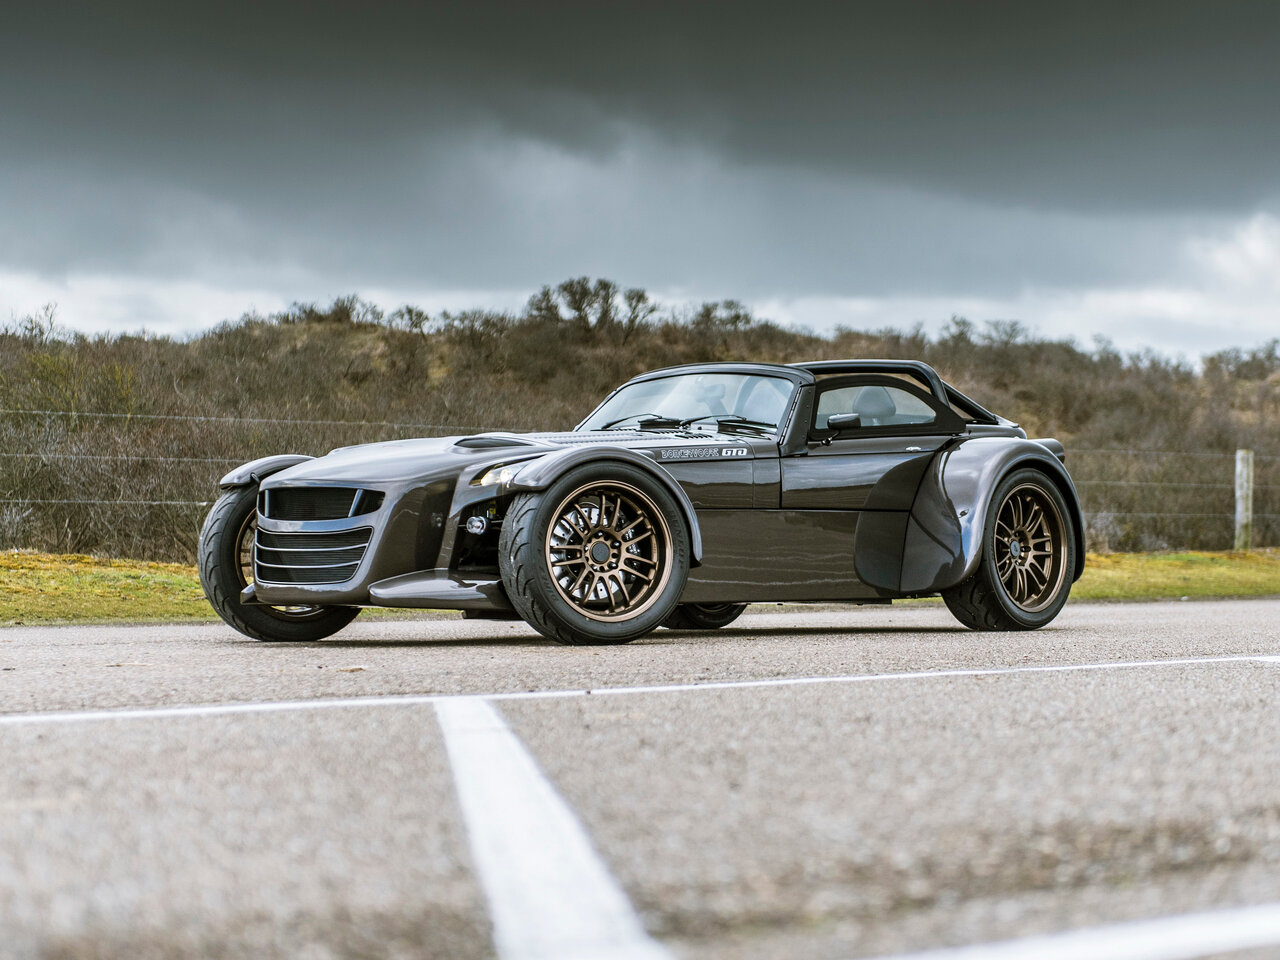 DONKERVOORT D8 GTO